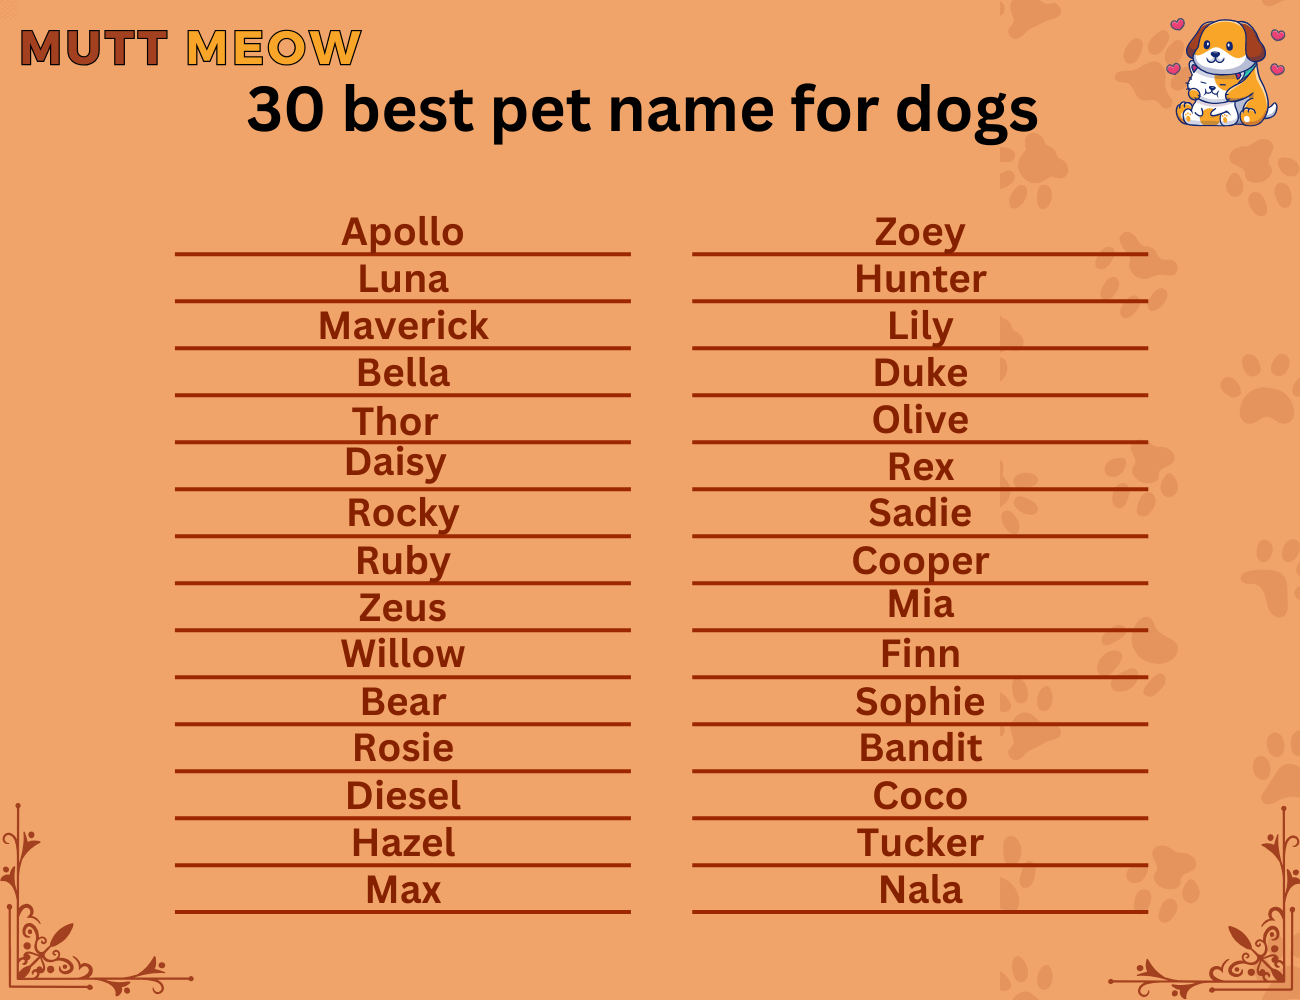 30 best pet name for dogs